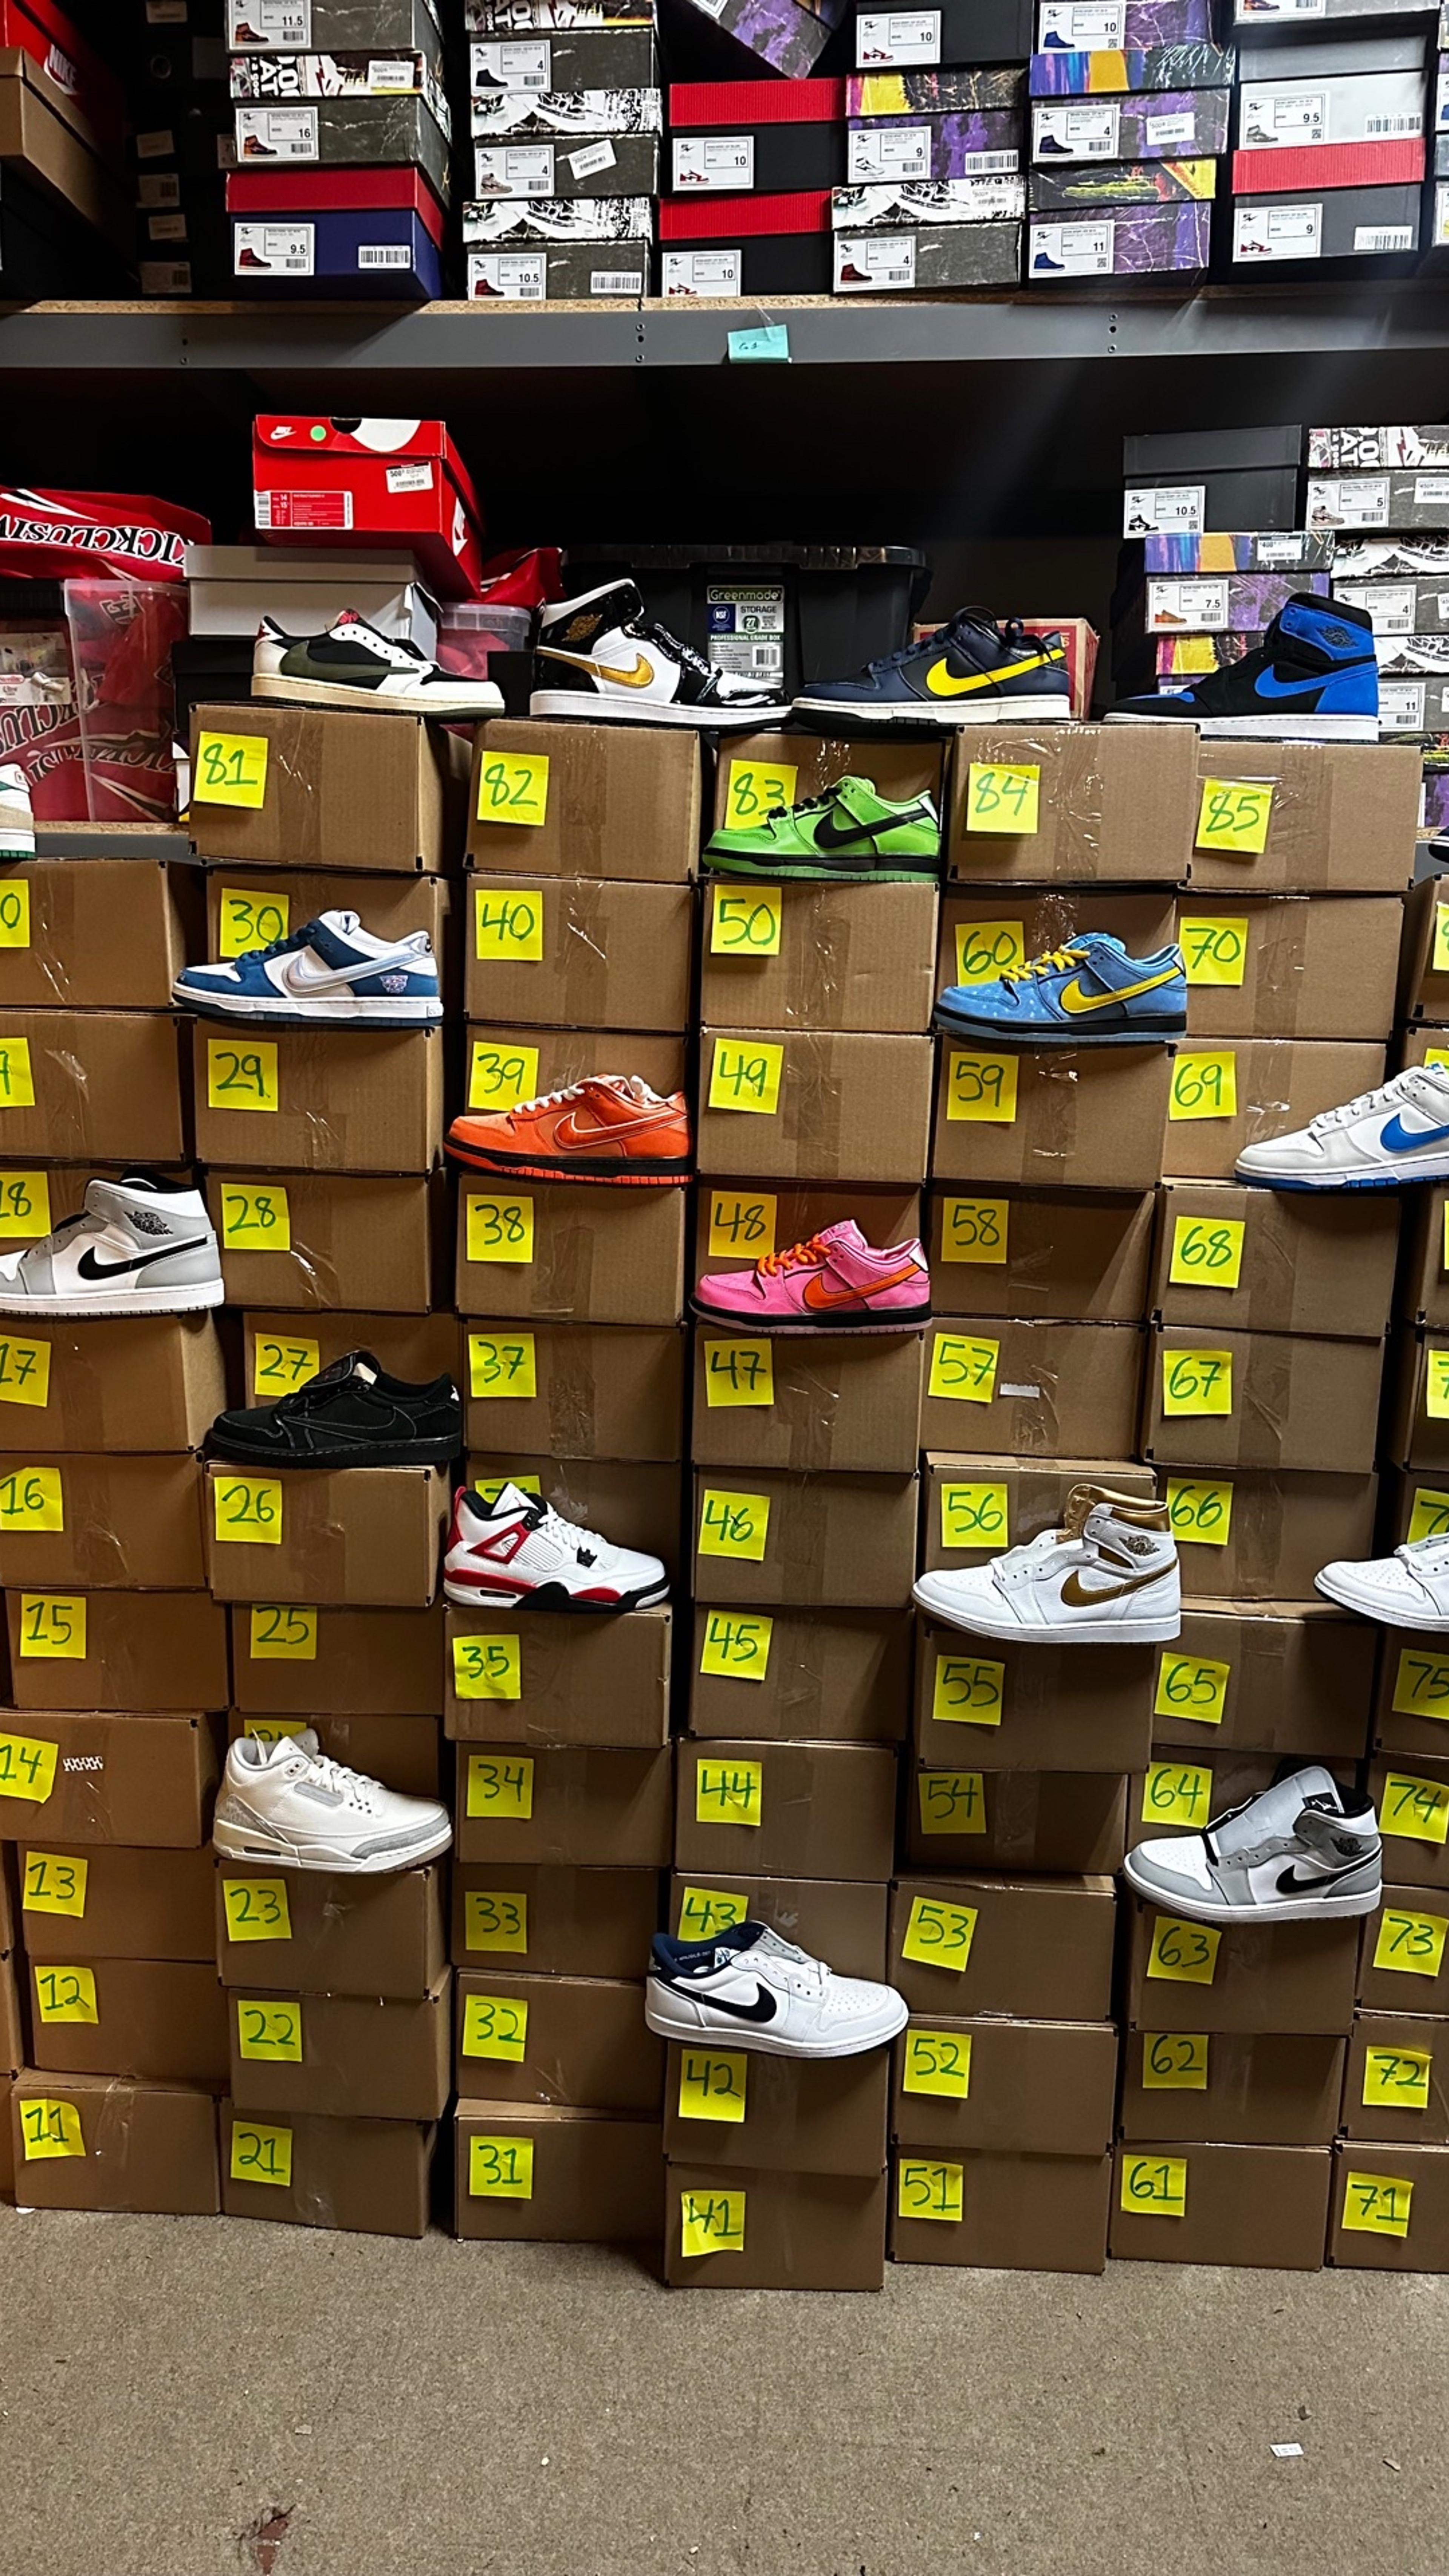 Preview image for the show titled "Every box has sneakers! Over $20,000 in prizes " at Today @ 11:00 PM